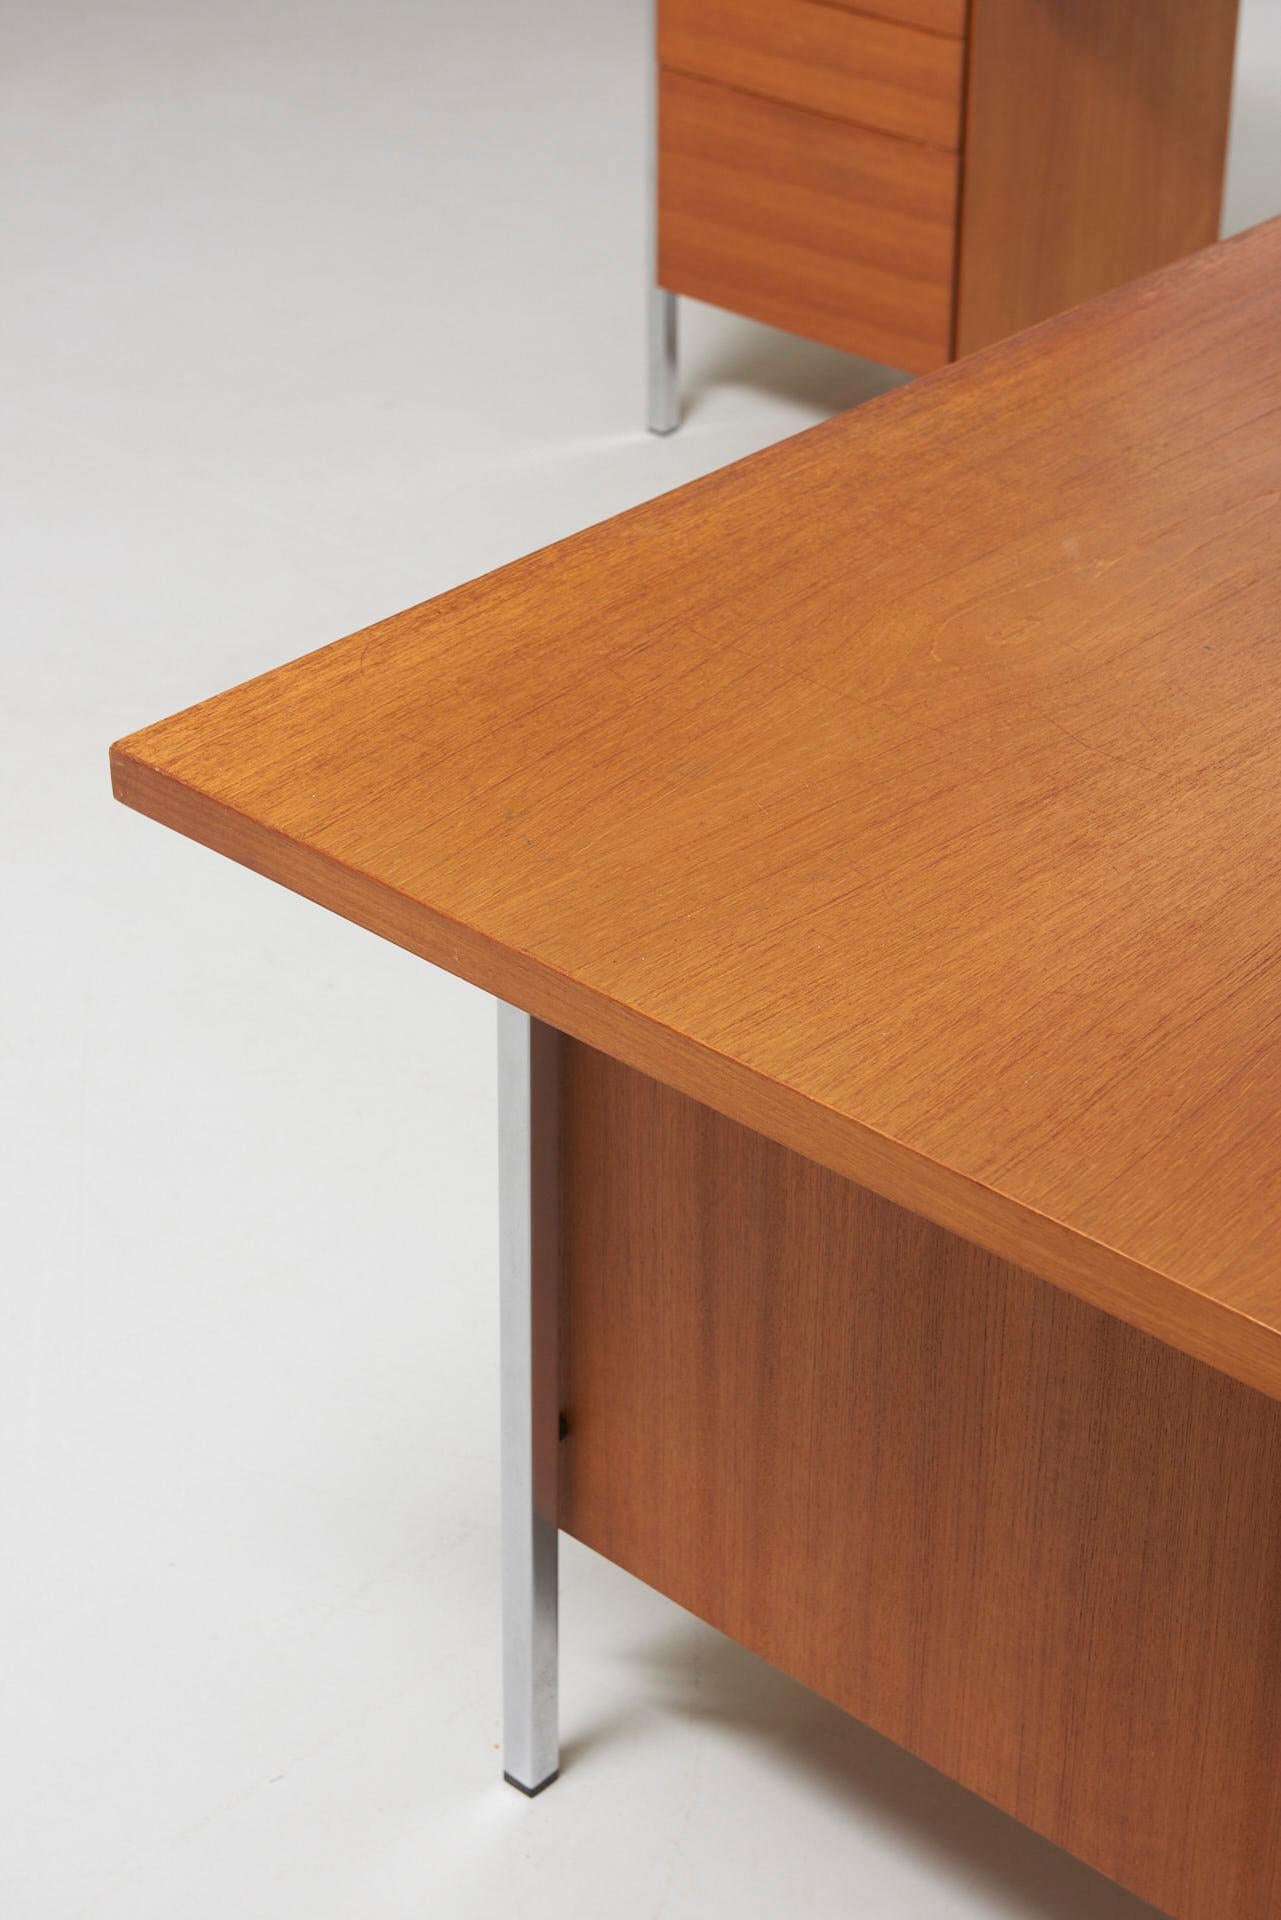 An L-shaped working space from the series model 1500. The executive desk (190 x 90 x 74) has a double pedestal, 3 drawers left and 2 drawers right, with a pair of keys. The smaller desk (115 x 48 x 66) can be placed behind or at side. Chrome-plated